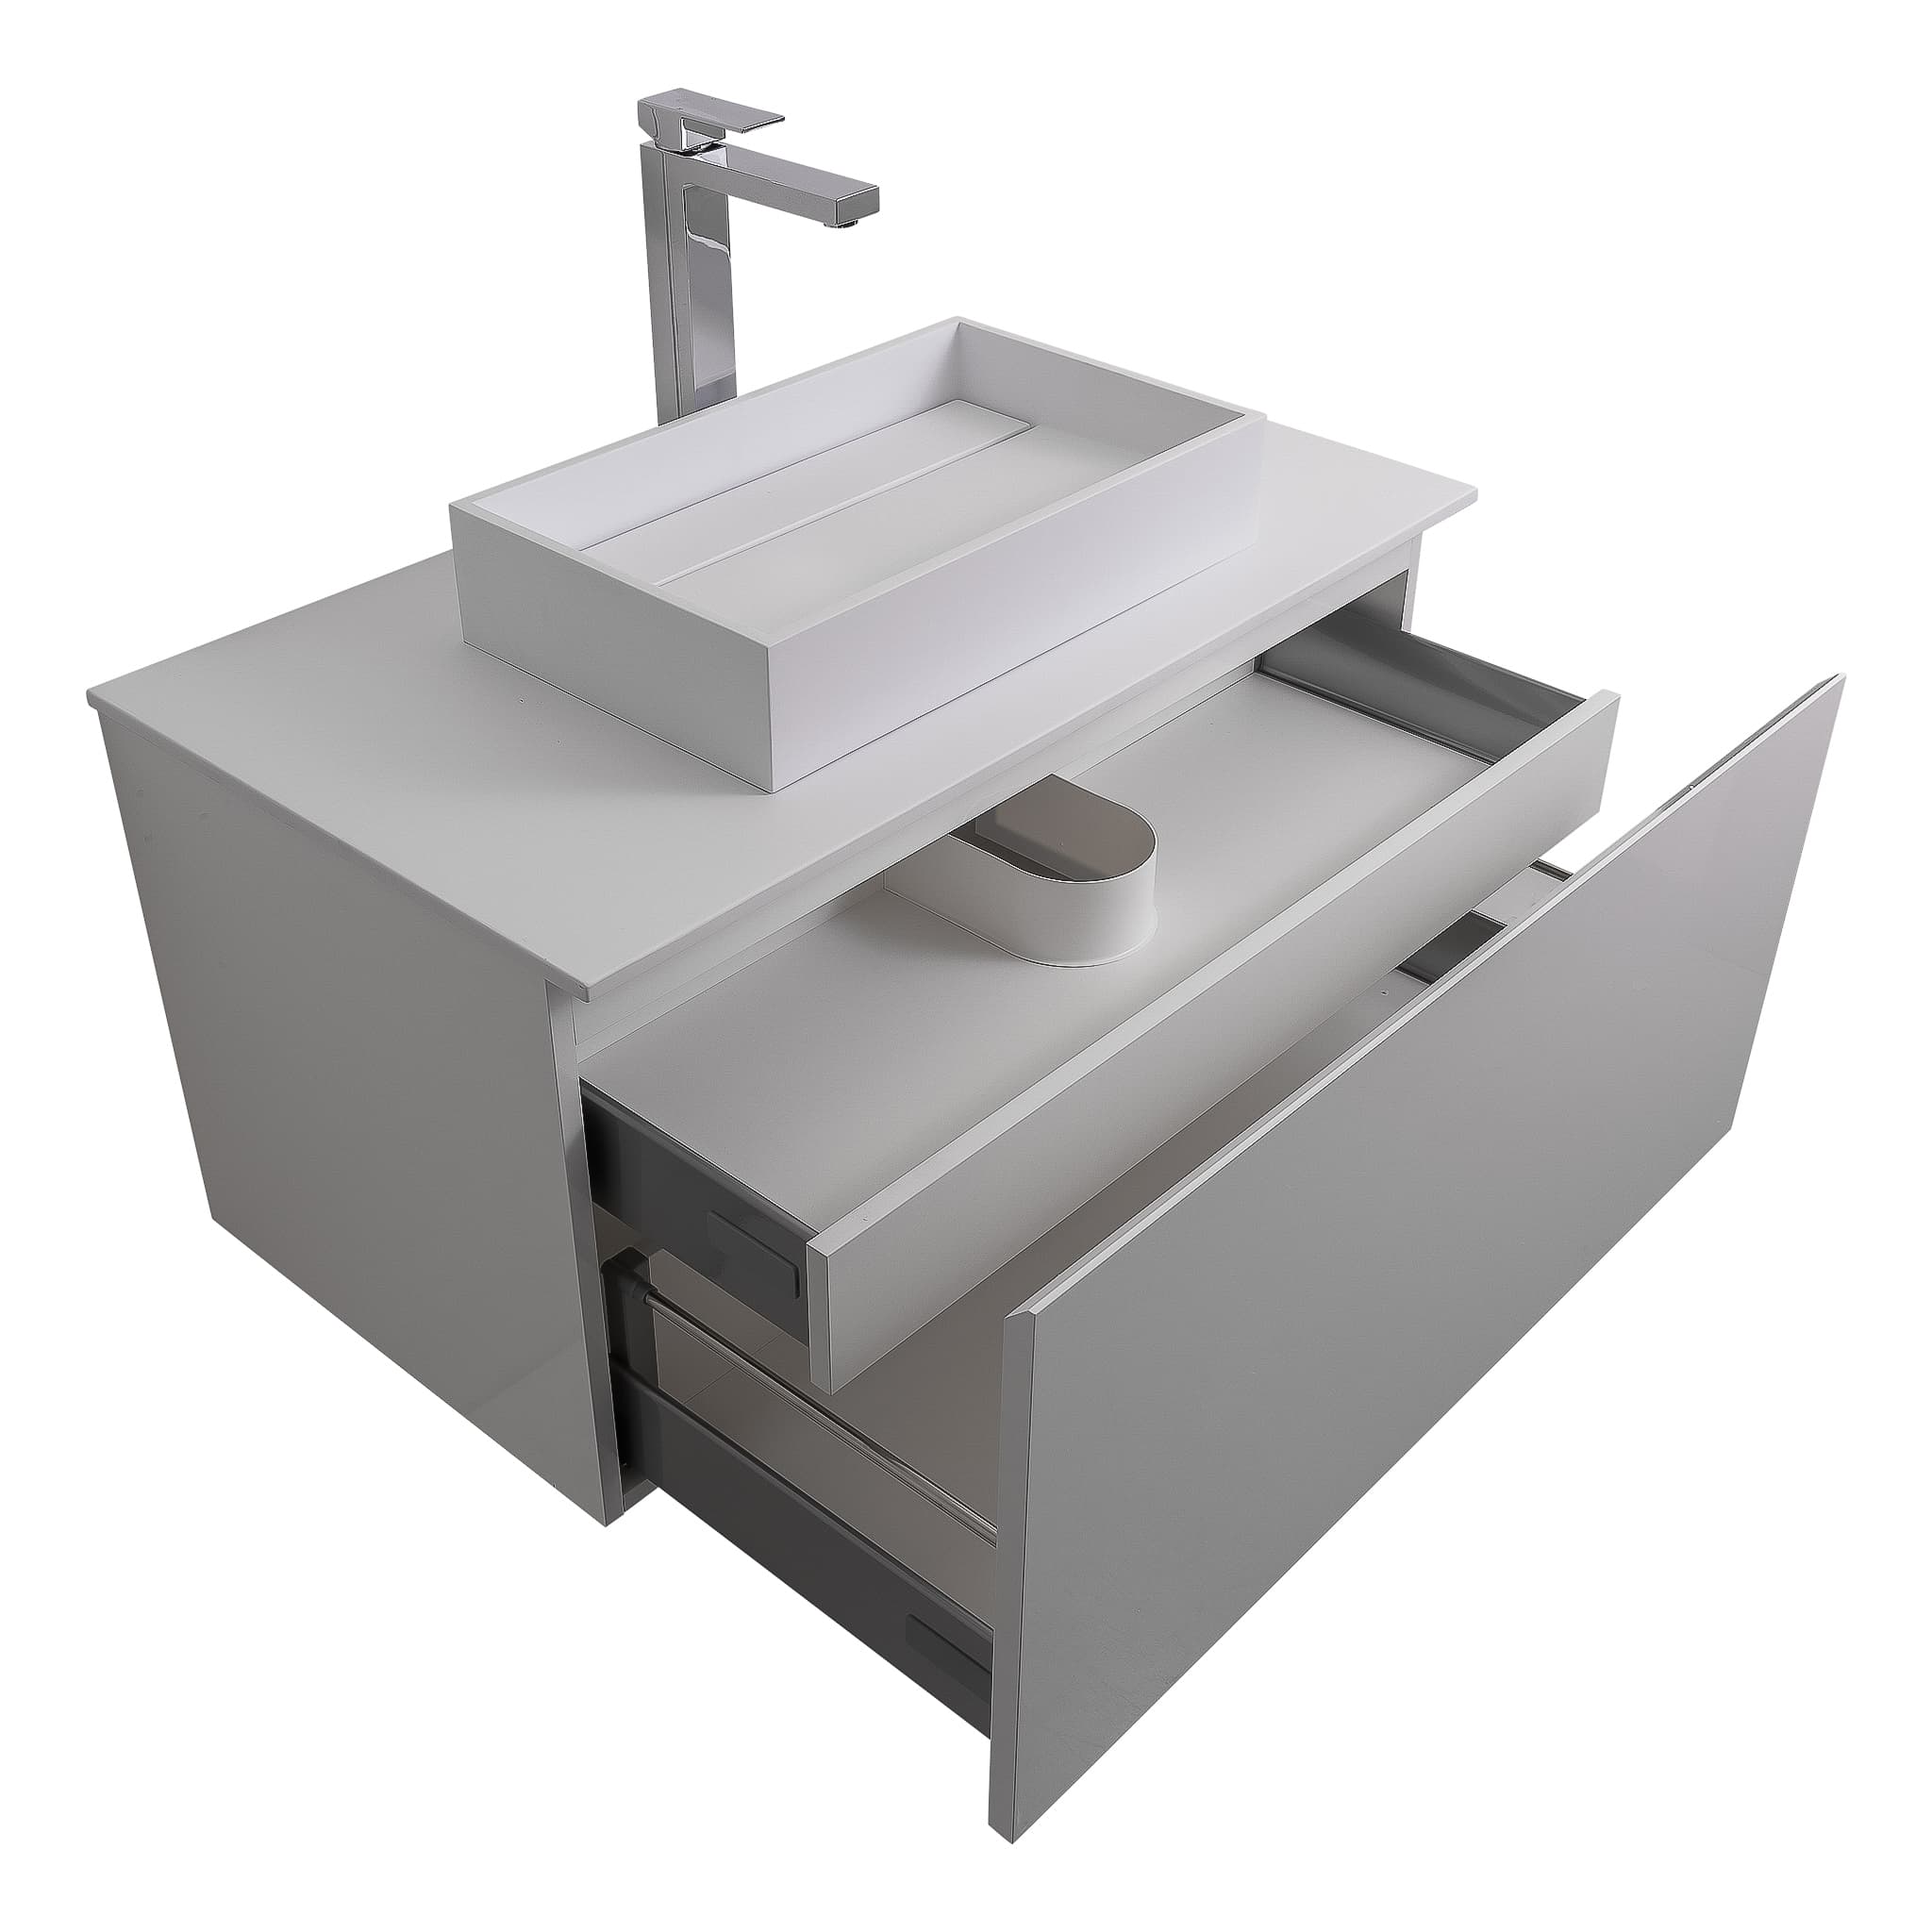 Venice 35.5 White High Gloss Cabinet, Solid Surface Flat White Counter And Infinity Square Solid Surface White Basin 1329, Wall Mounted Modern Vanity Set